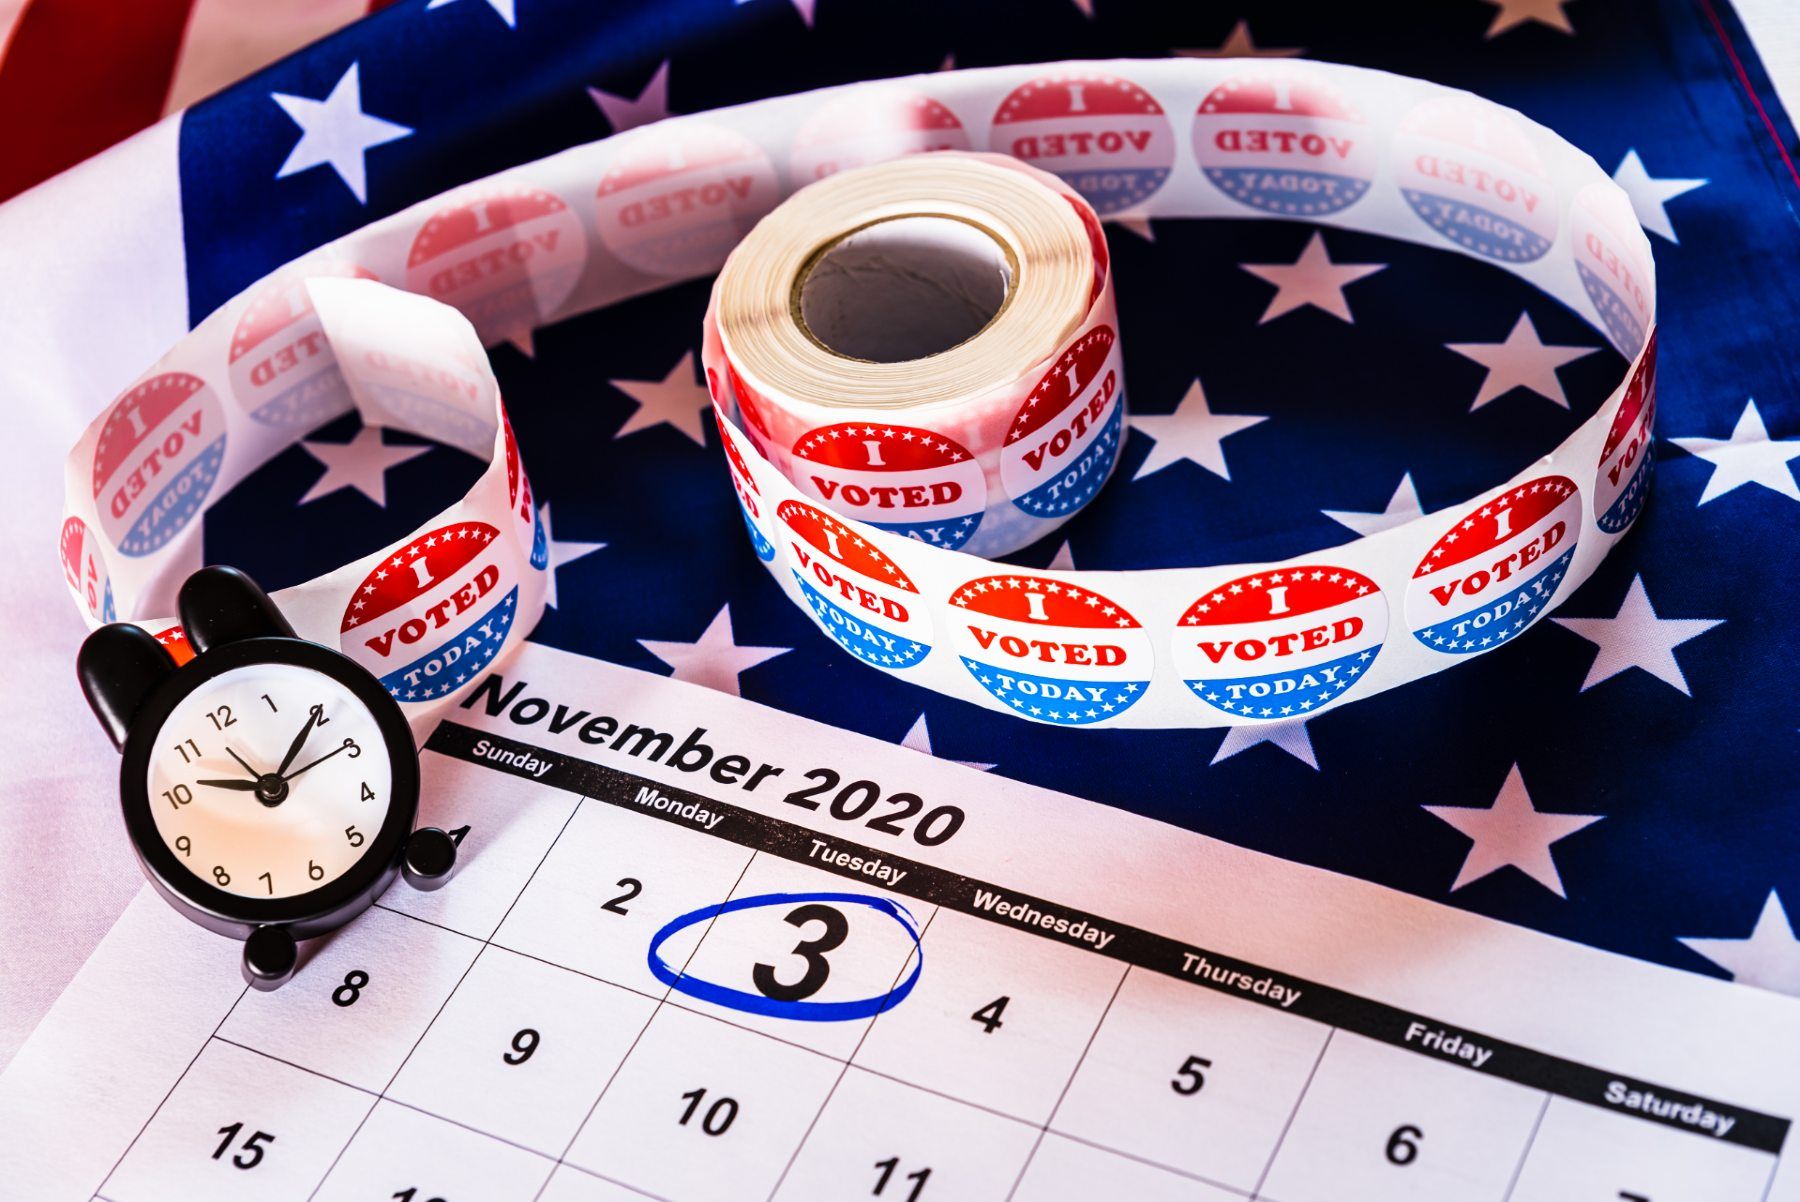 "I voted today" stickers lie on top of a calendar with Nov. 3, 2020, circled in blue - mail-in ballots